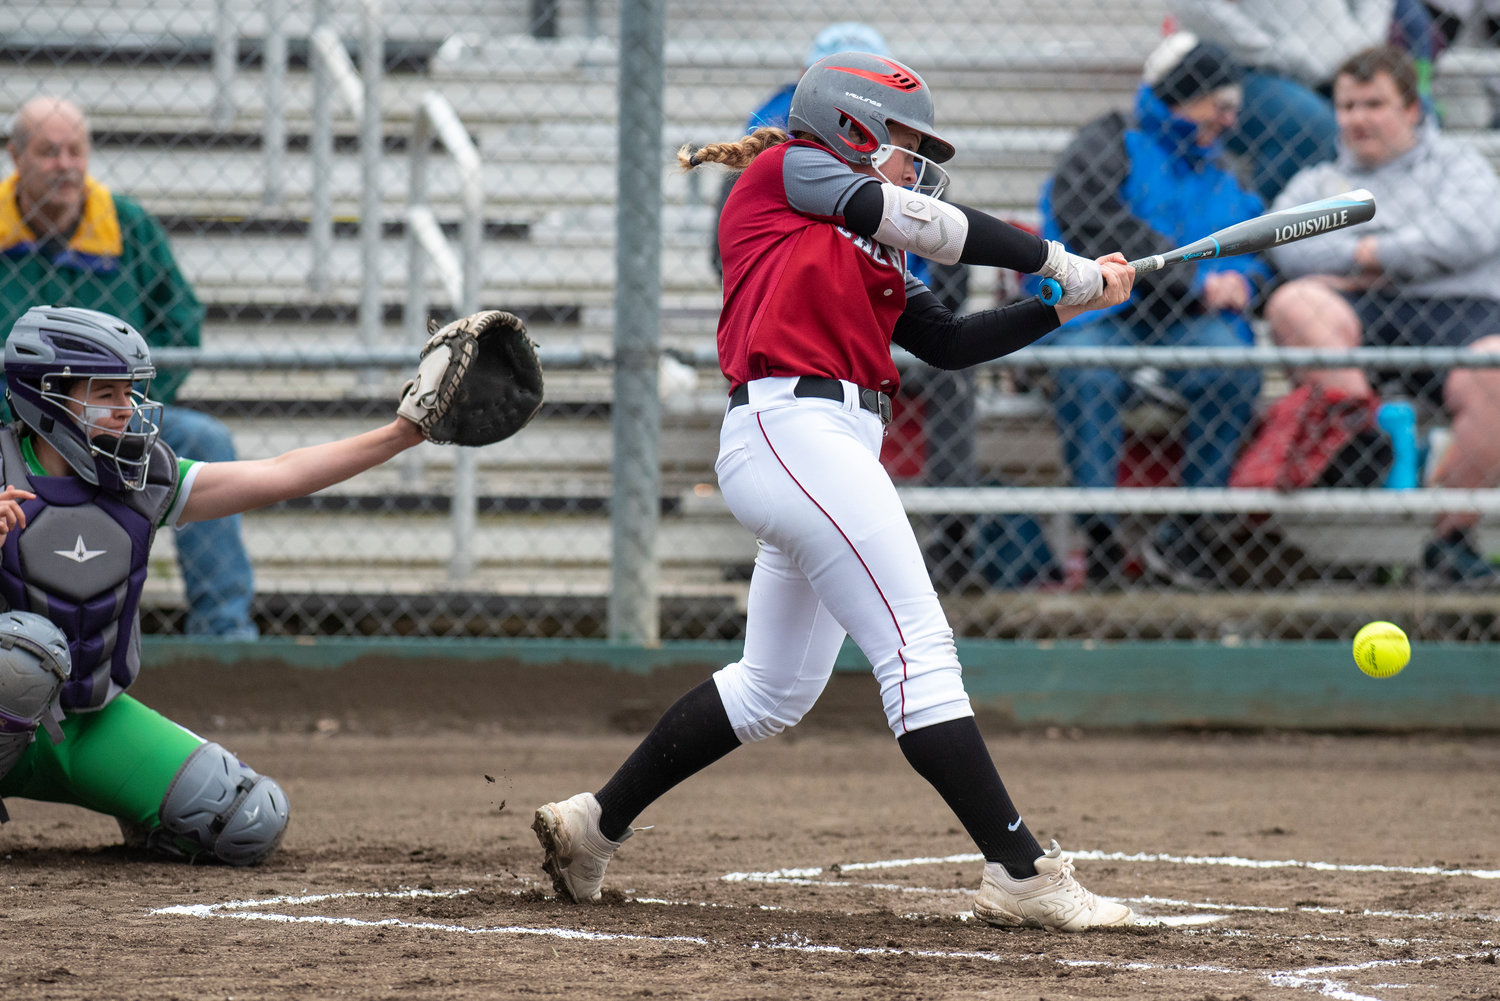 W.F. West's Lena Fragner makes contact on a Tumwater pitch during a road game on May 2.